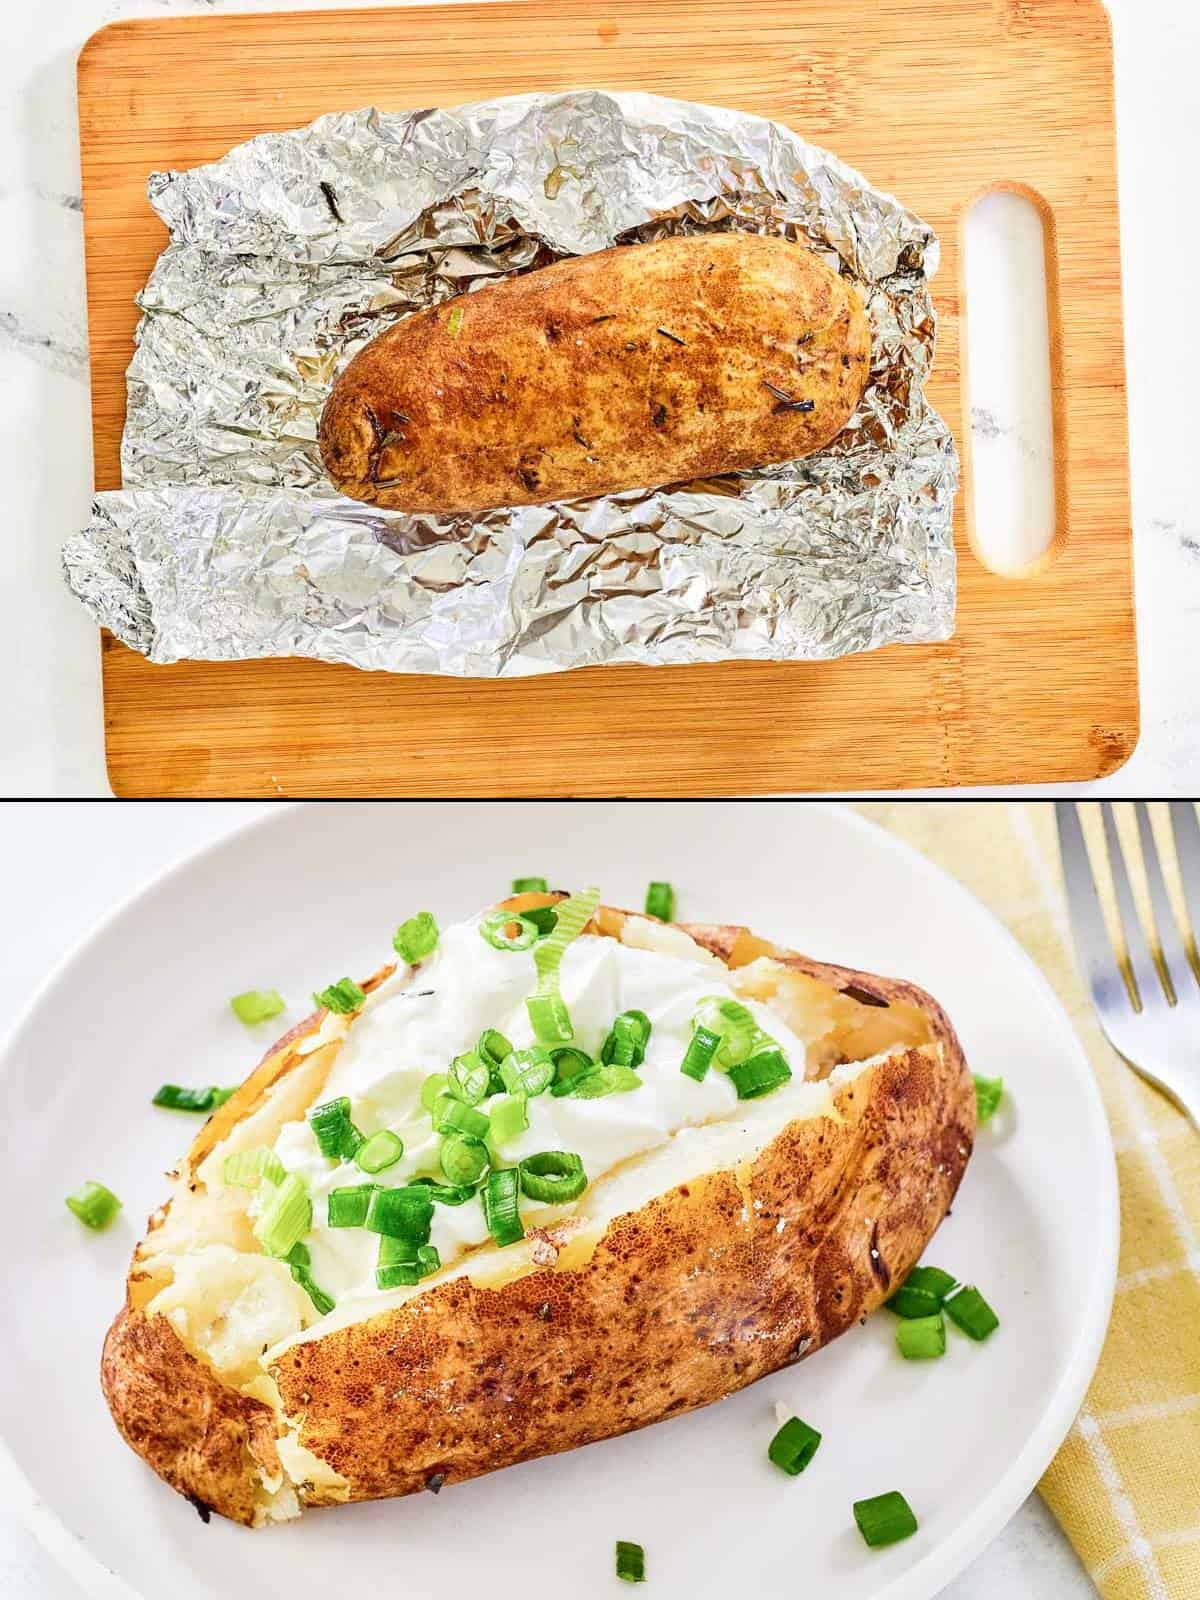 Unwrapping a potato in a foil pack and serving the potato with toppings.